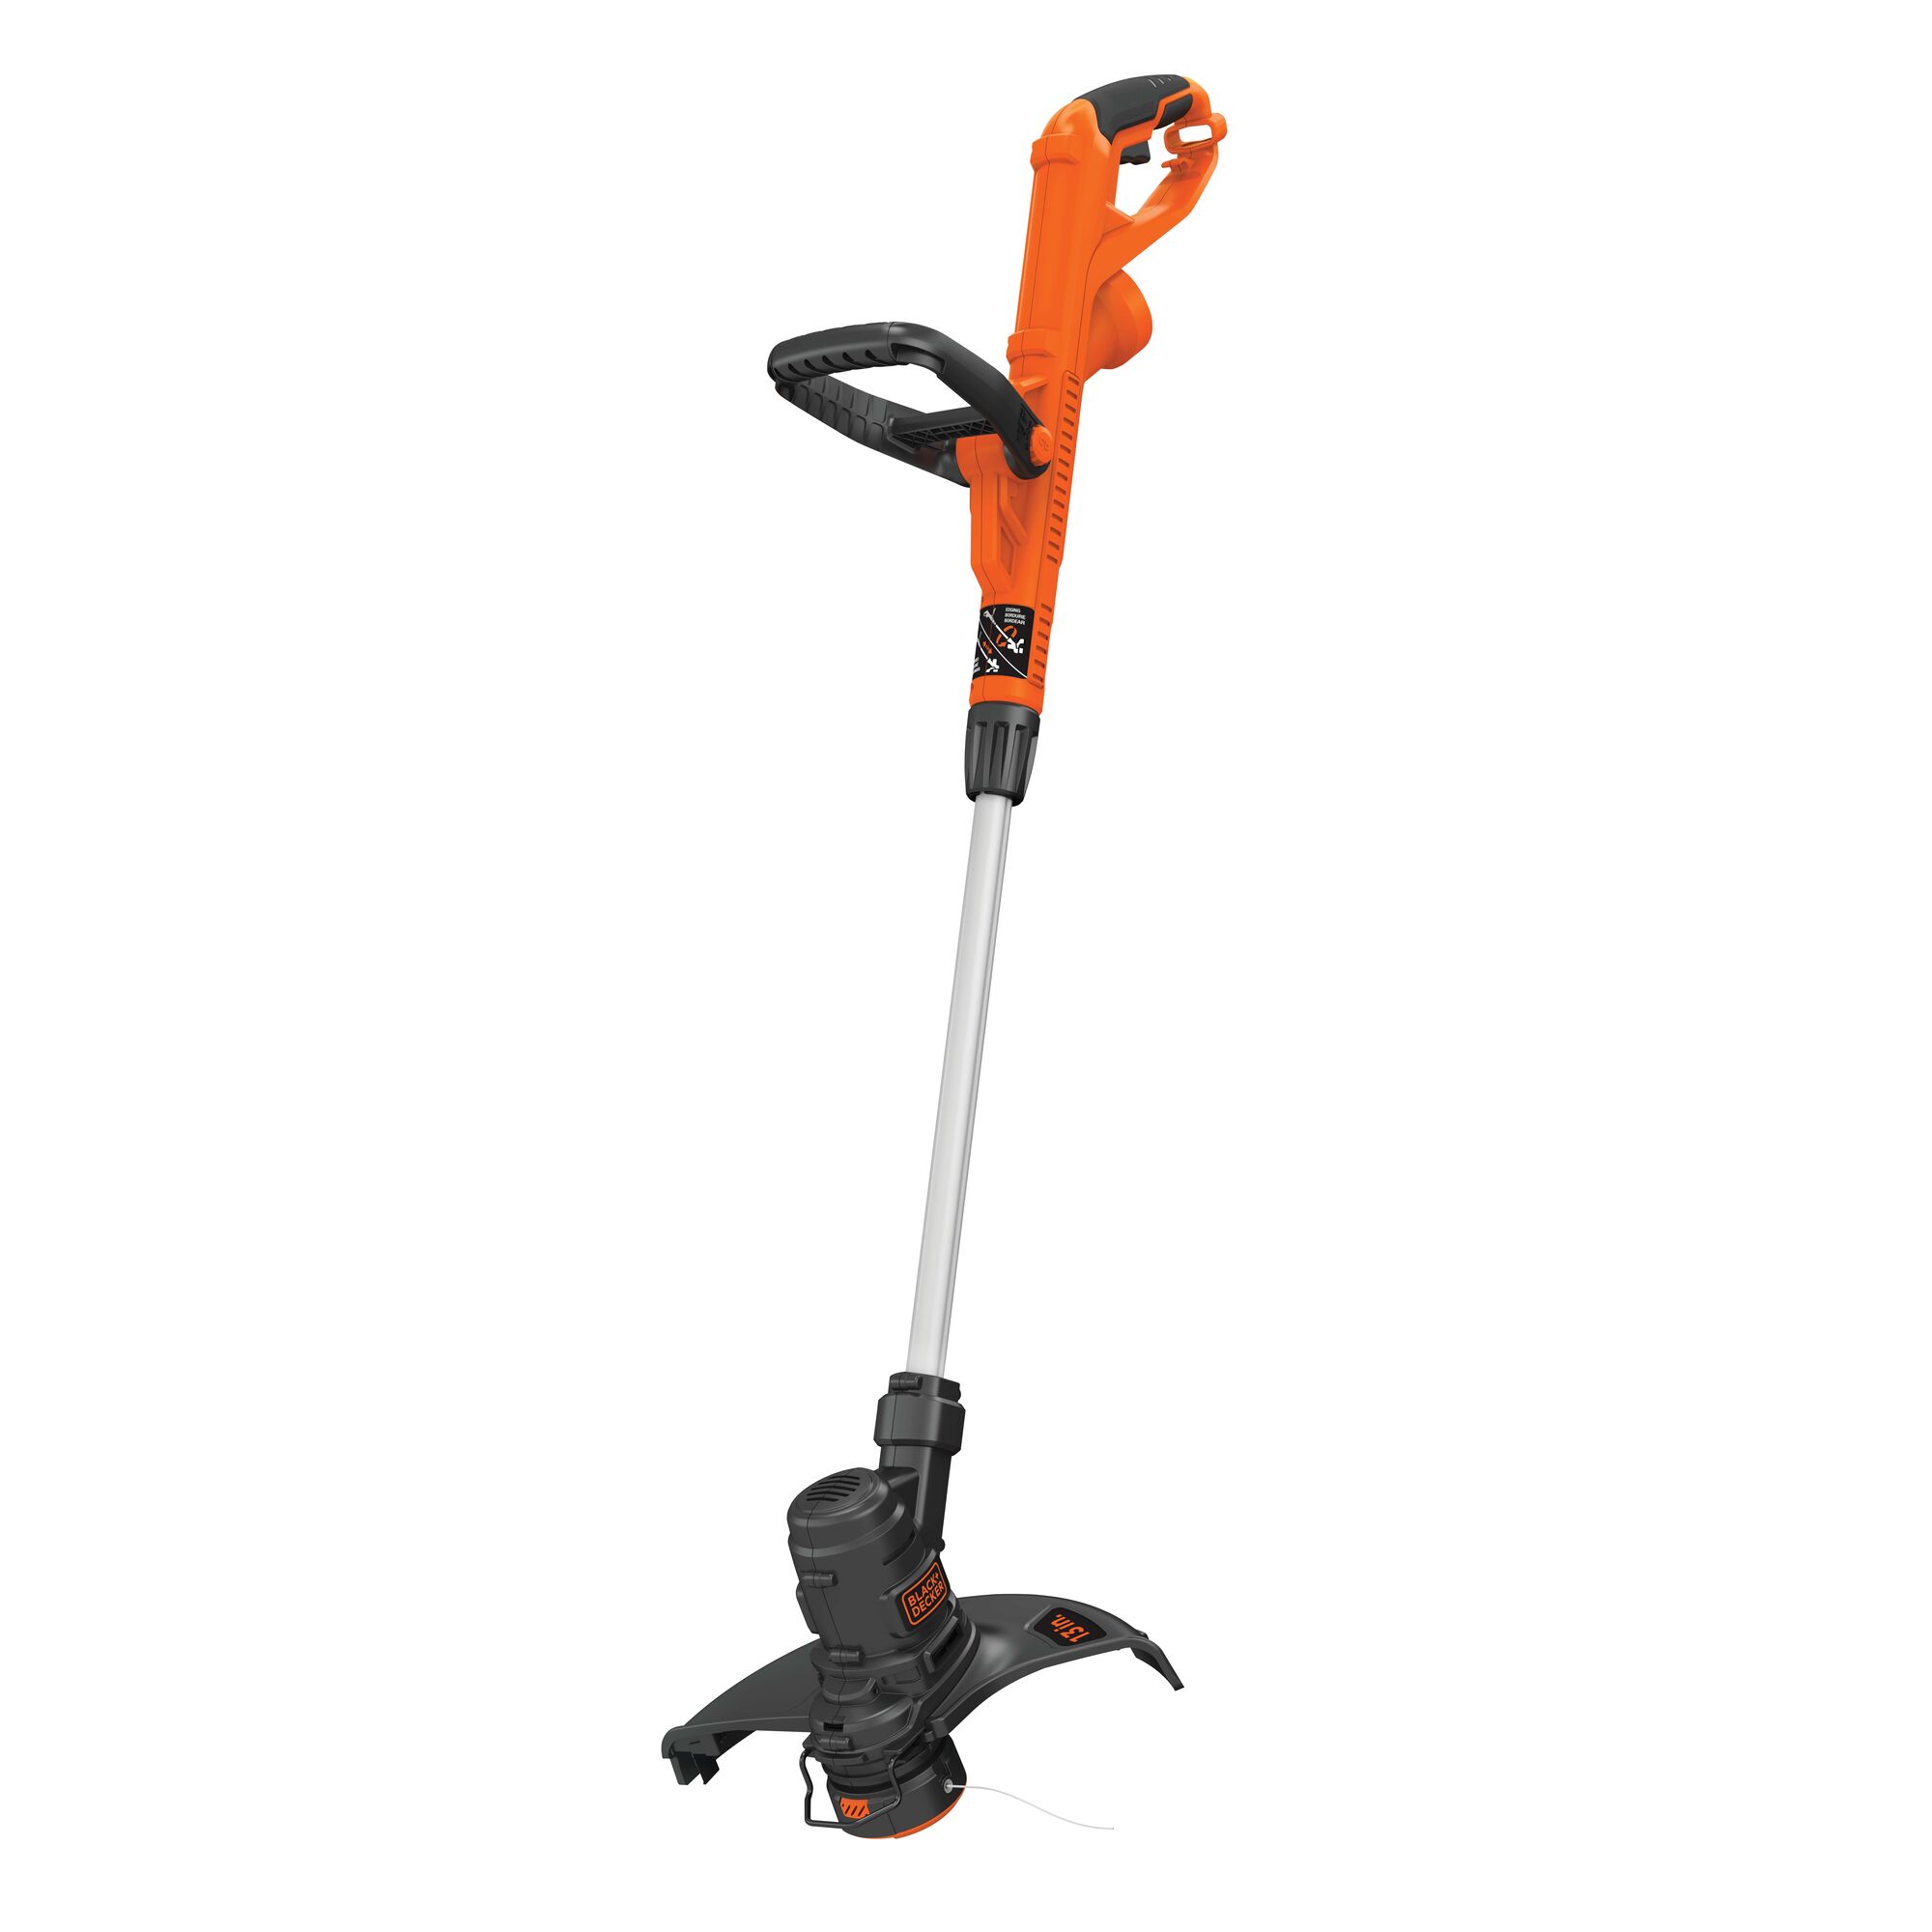 5 Amp 13 inch String Trimmer and Edger.